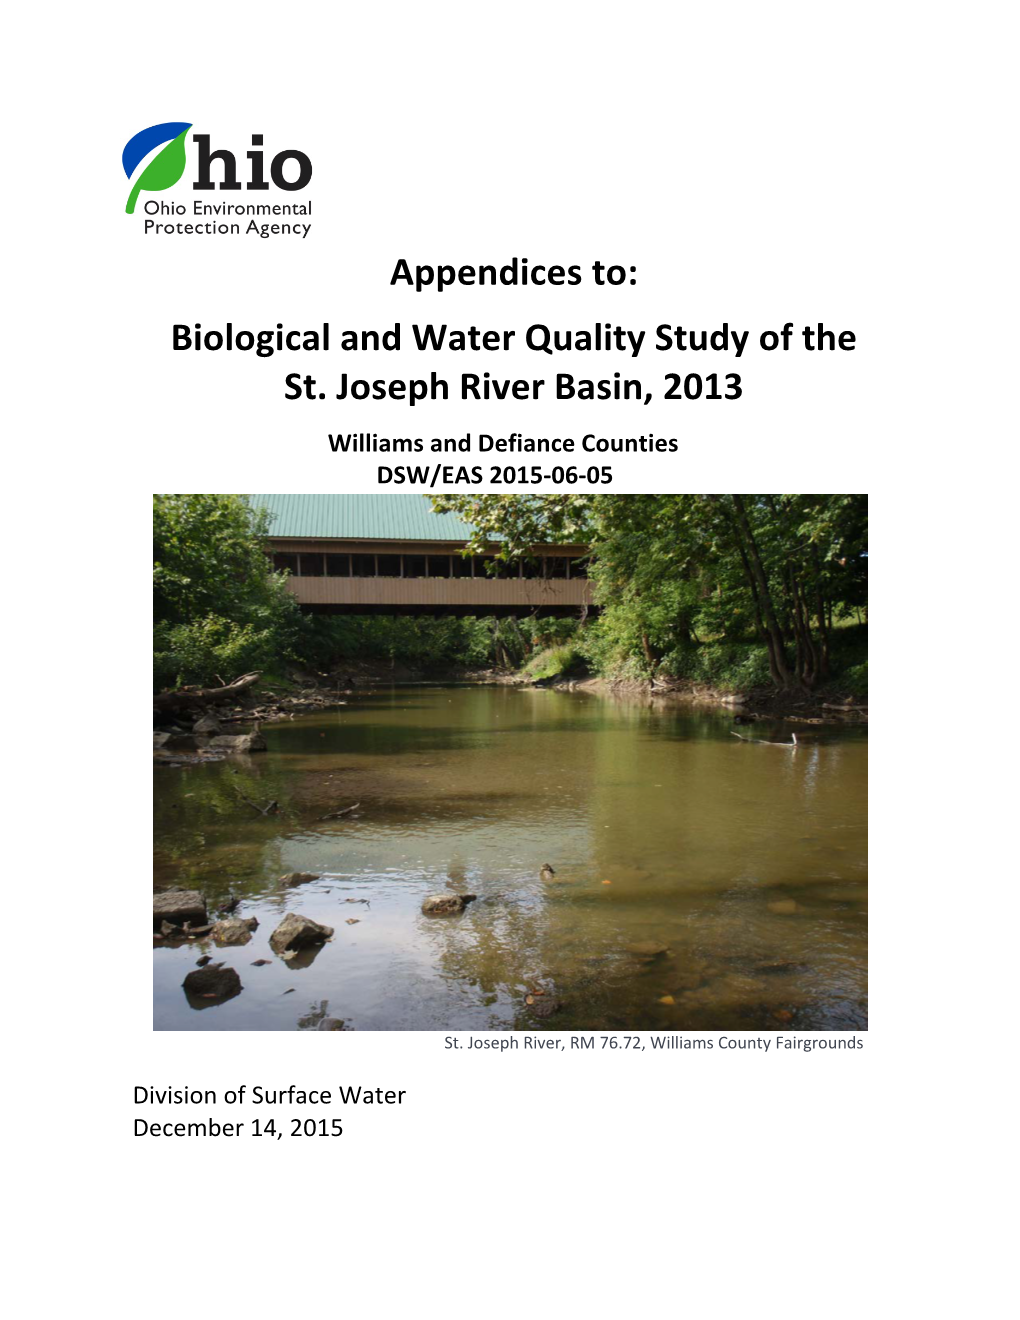 Appendices To: Biological and Water Quality Study of the St